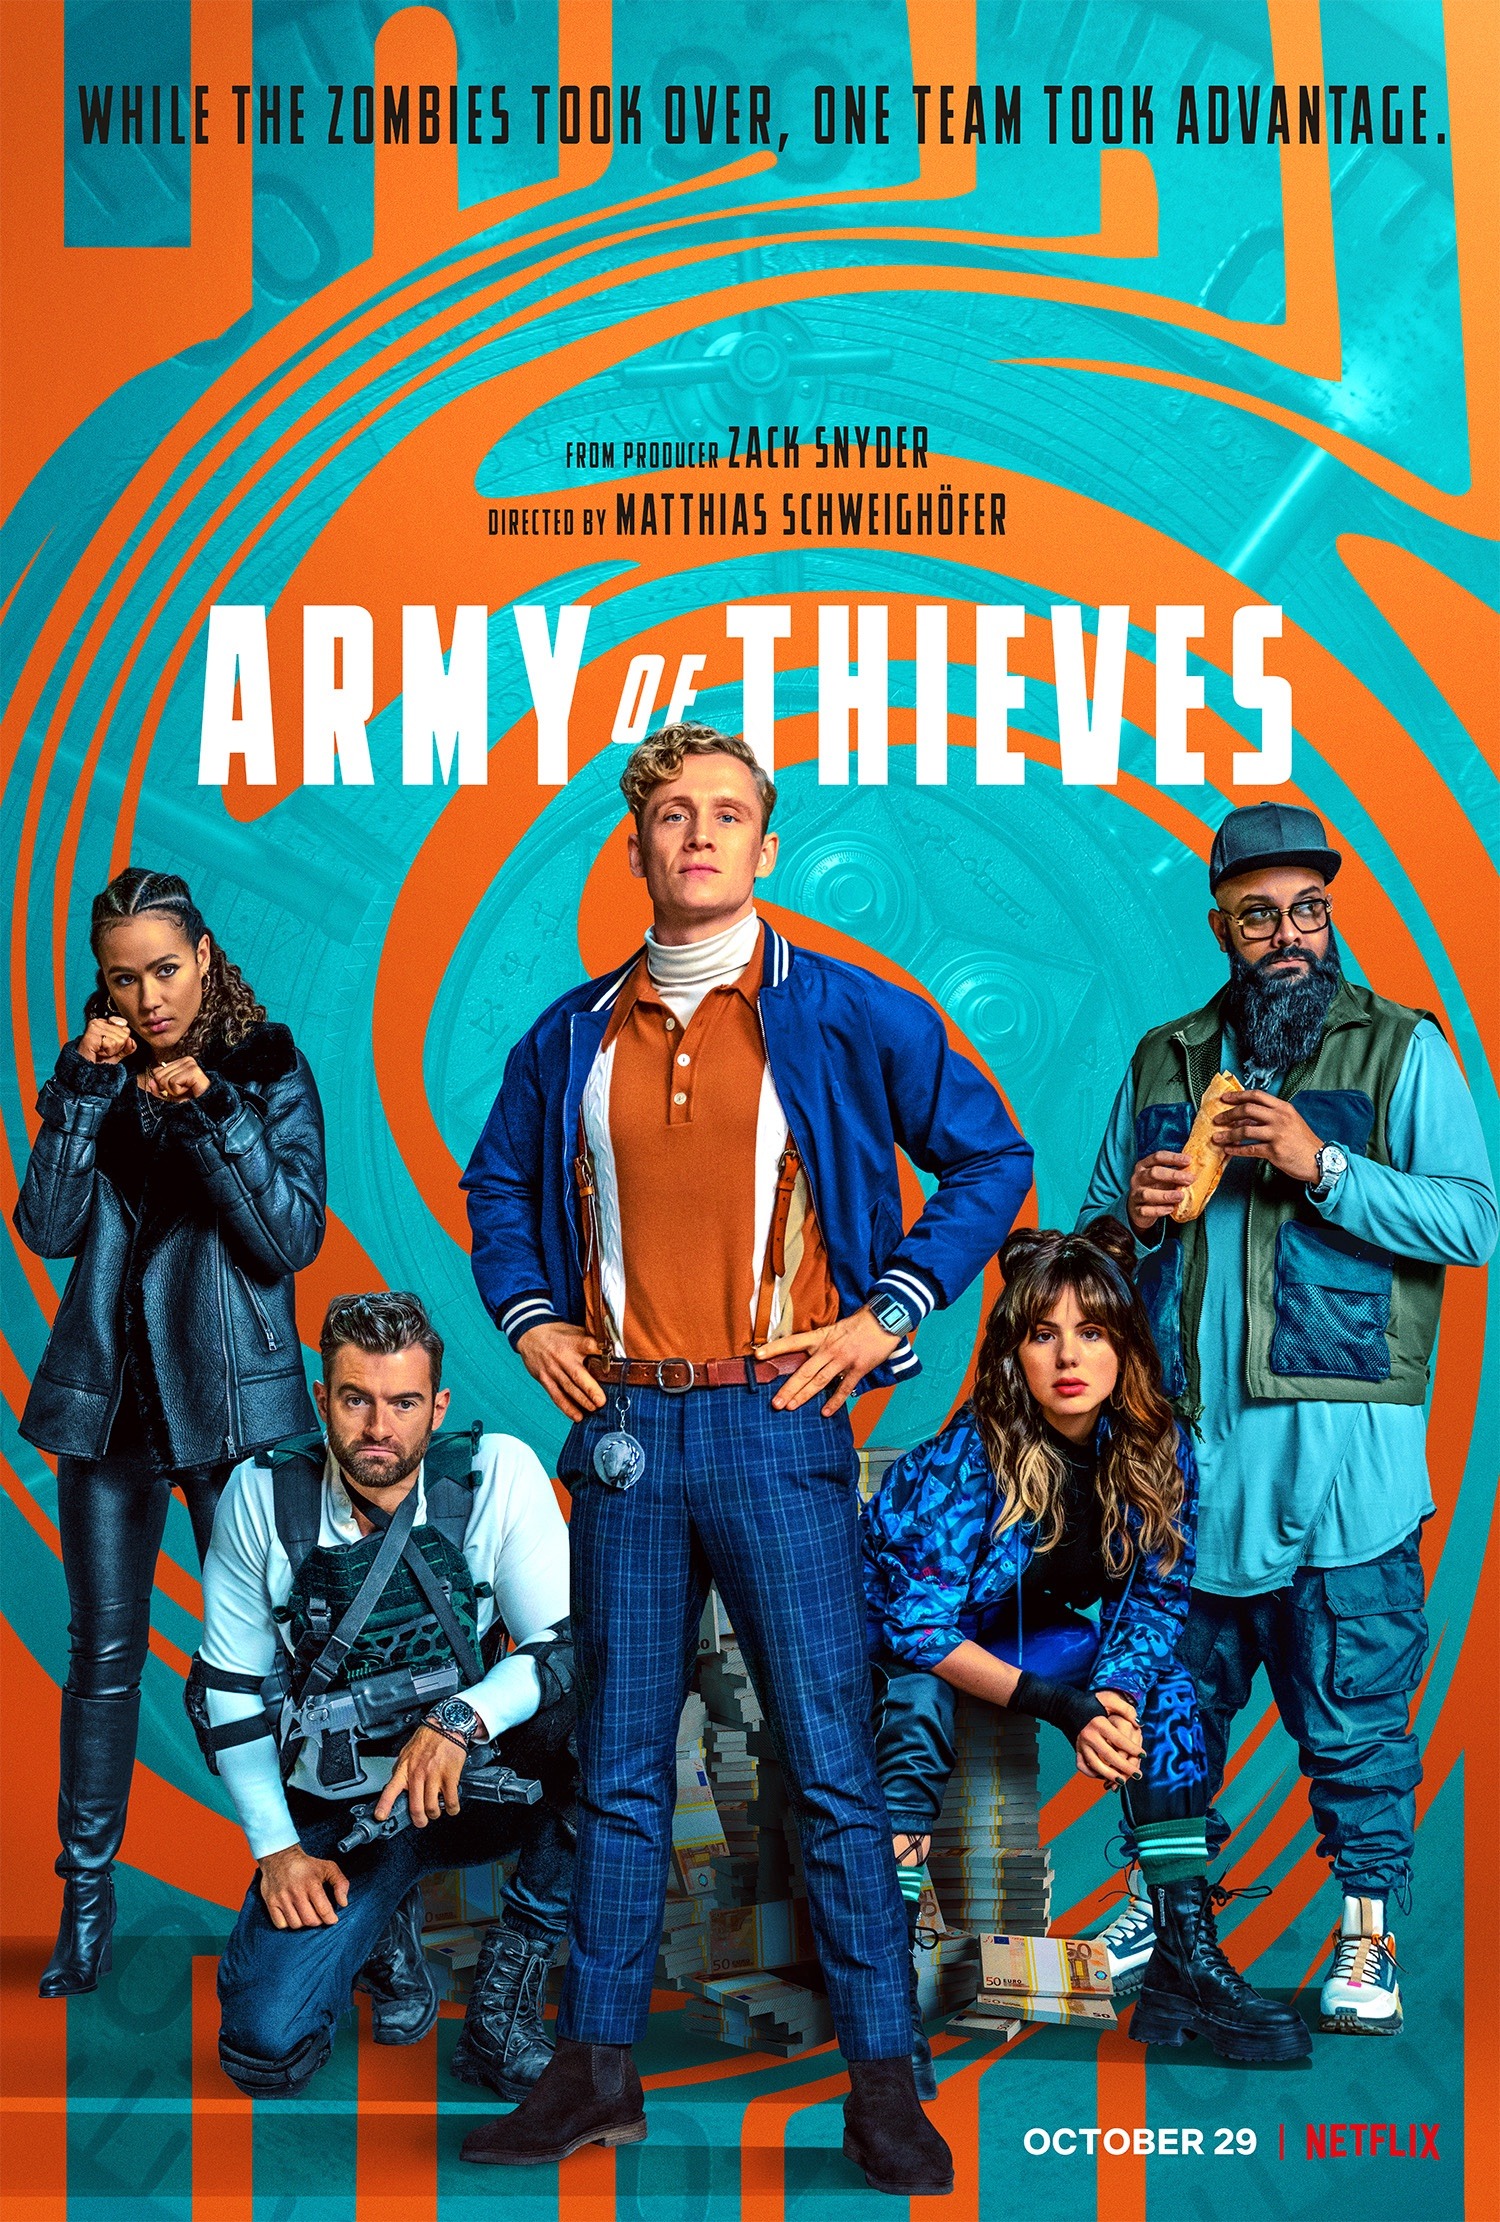 Army of thieves cast